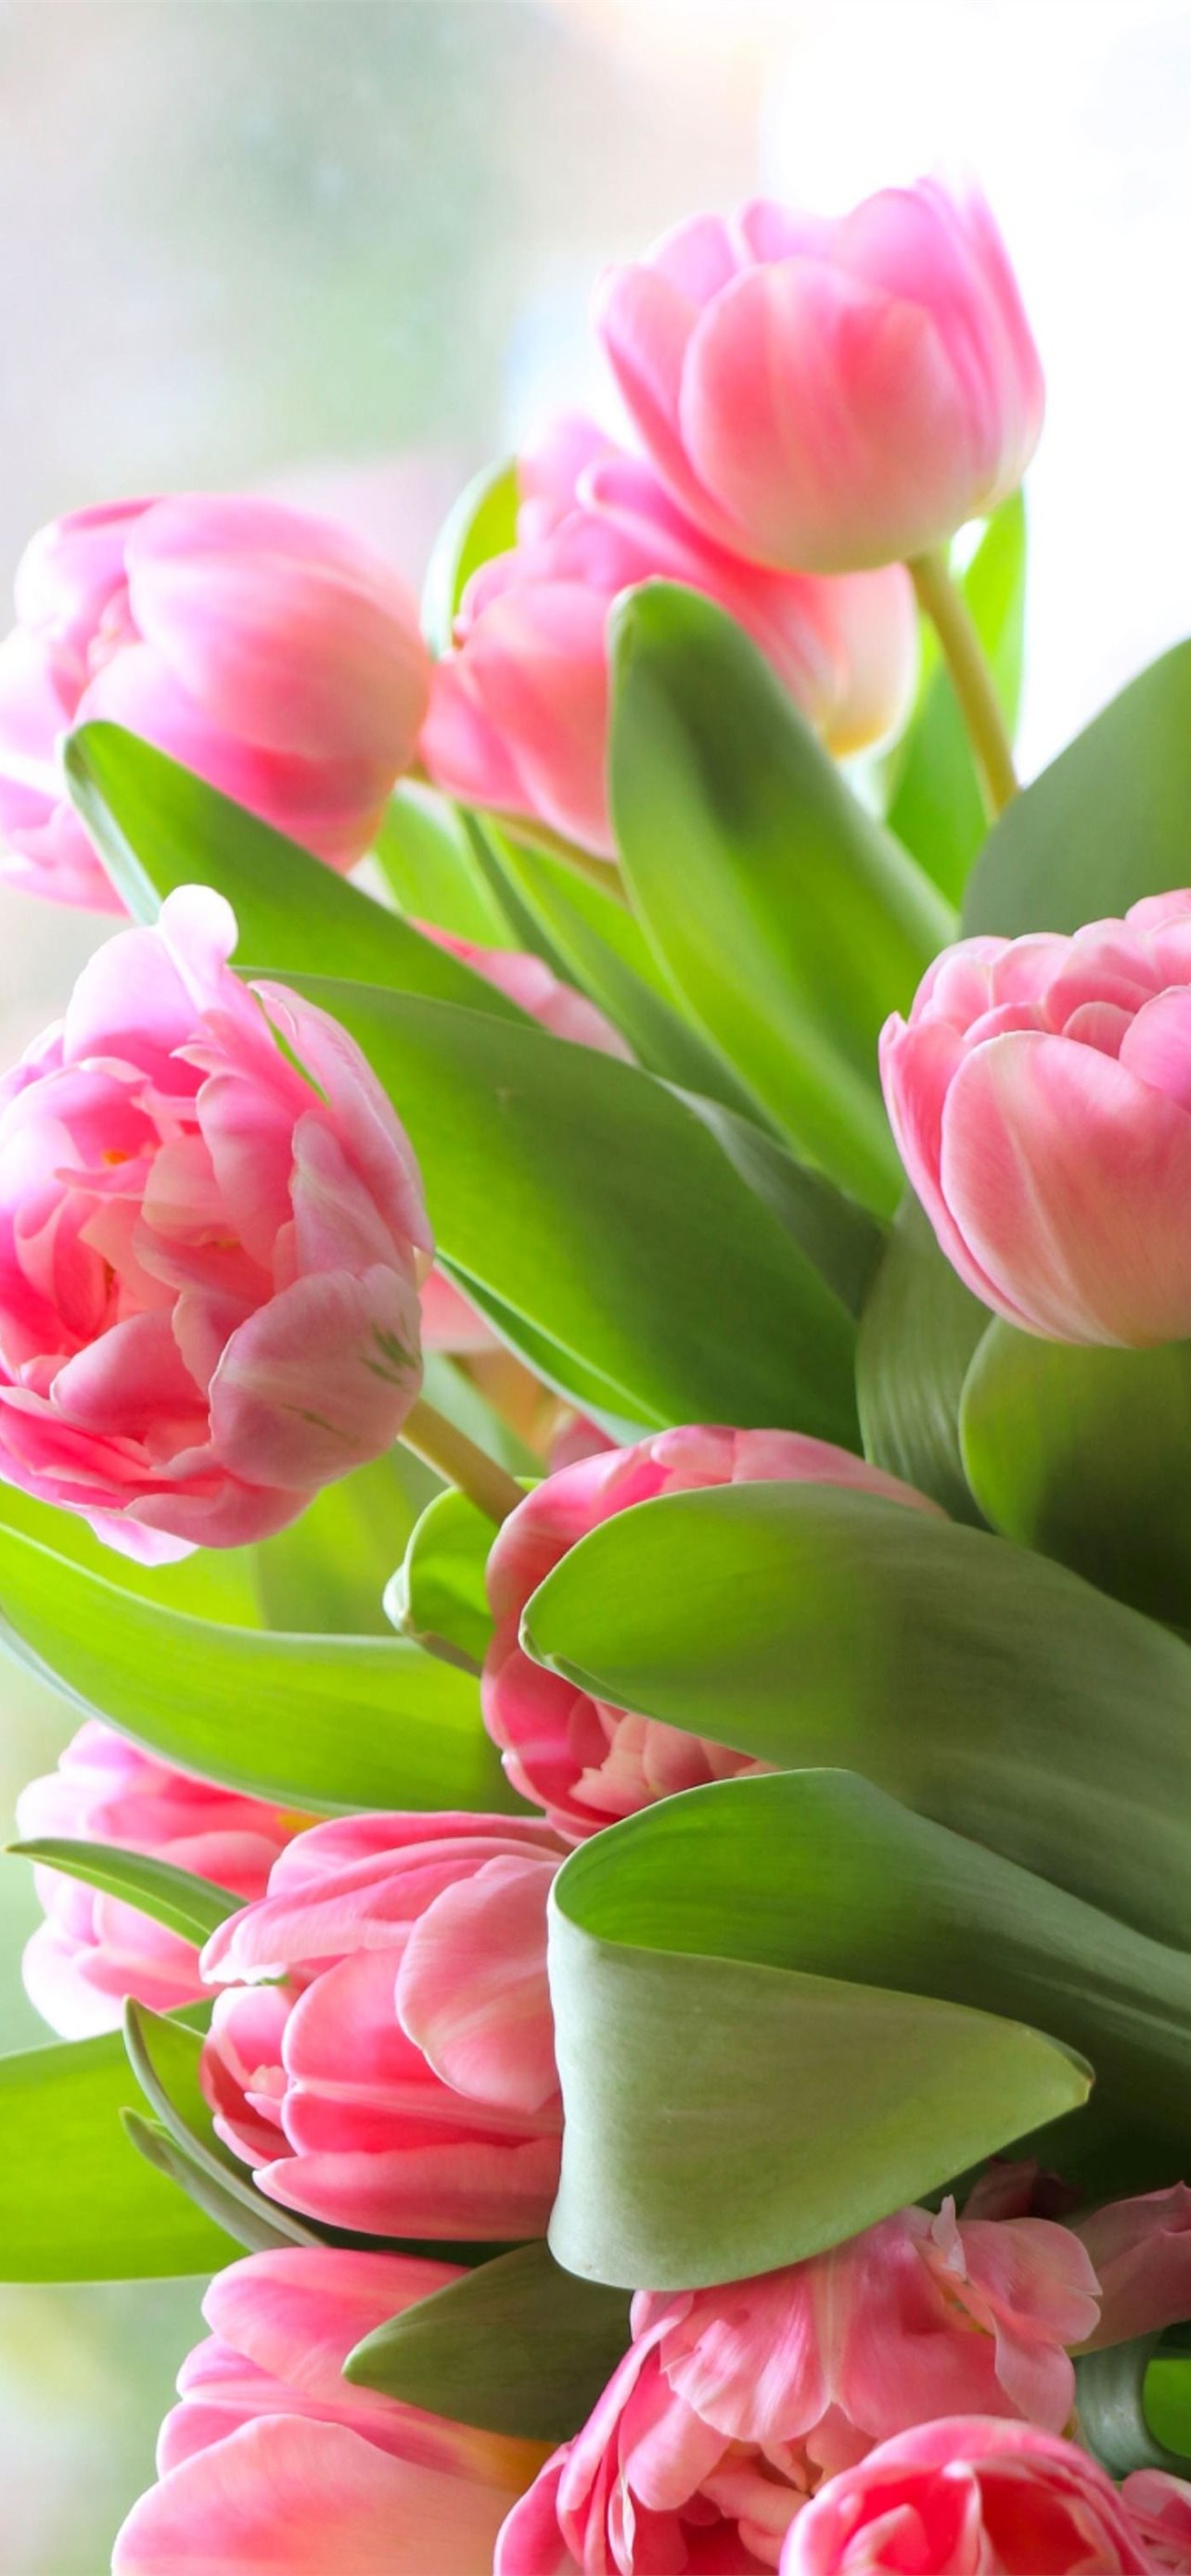 Download wallpaper 1350x2400 tulips flowers plants colorful iphone  876s6 for parallax hd background